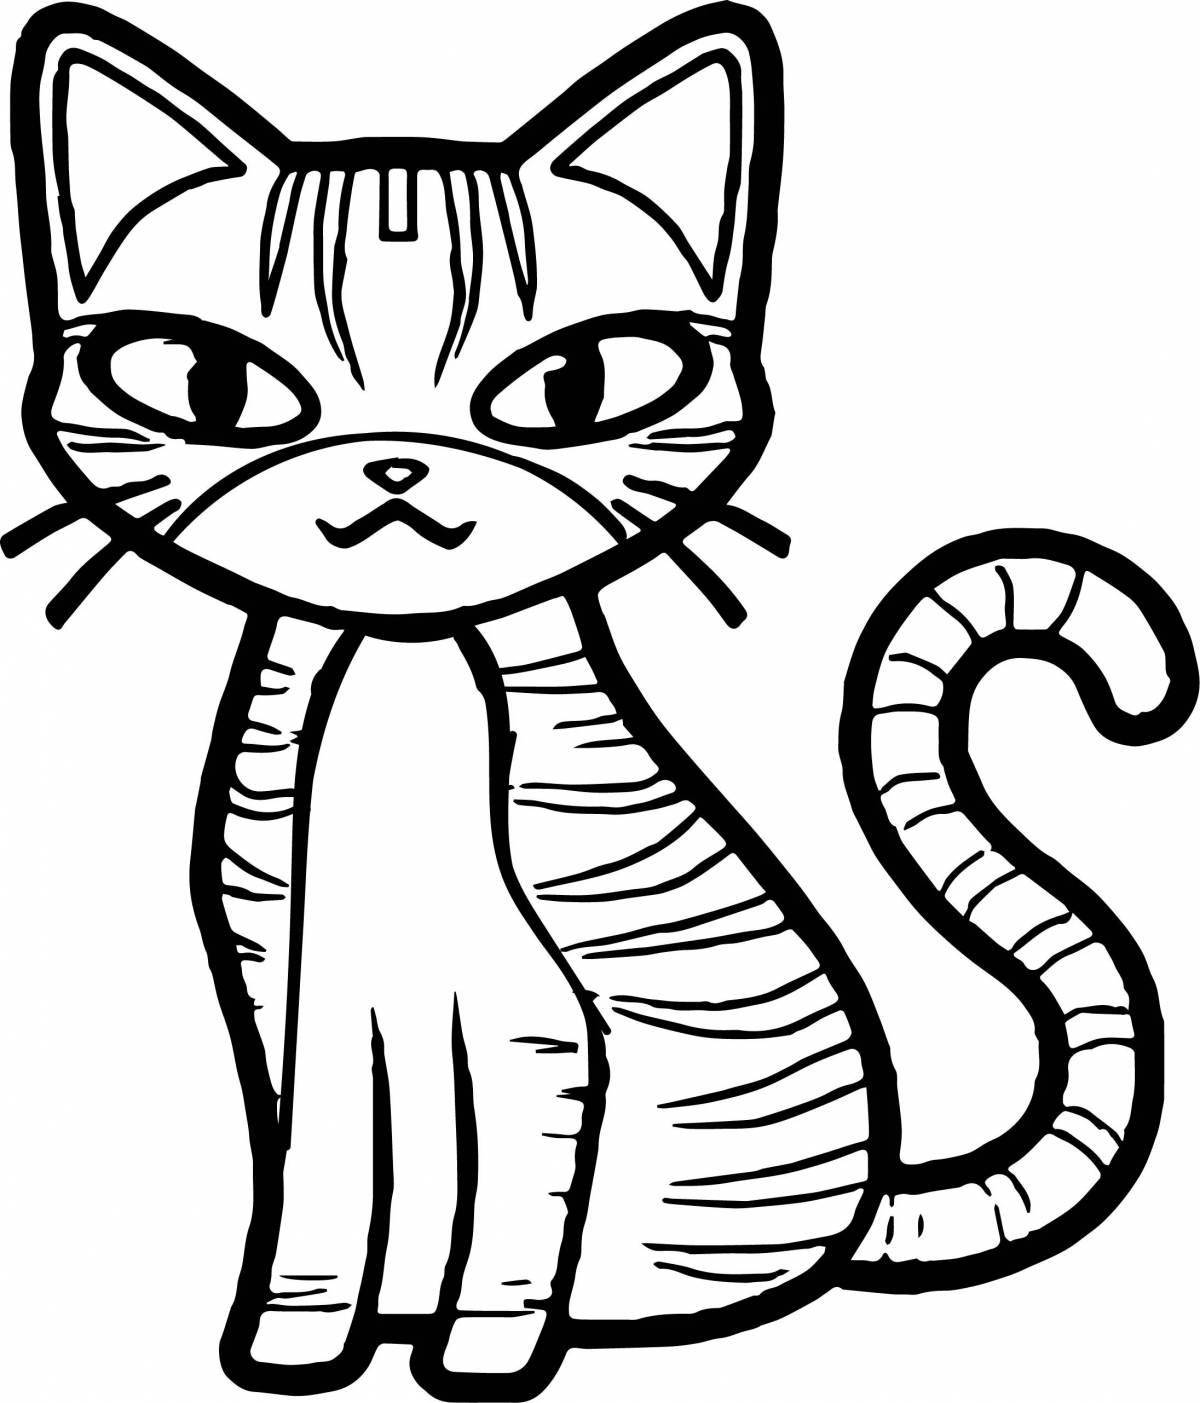 Awesome spiral cat coloring page